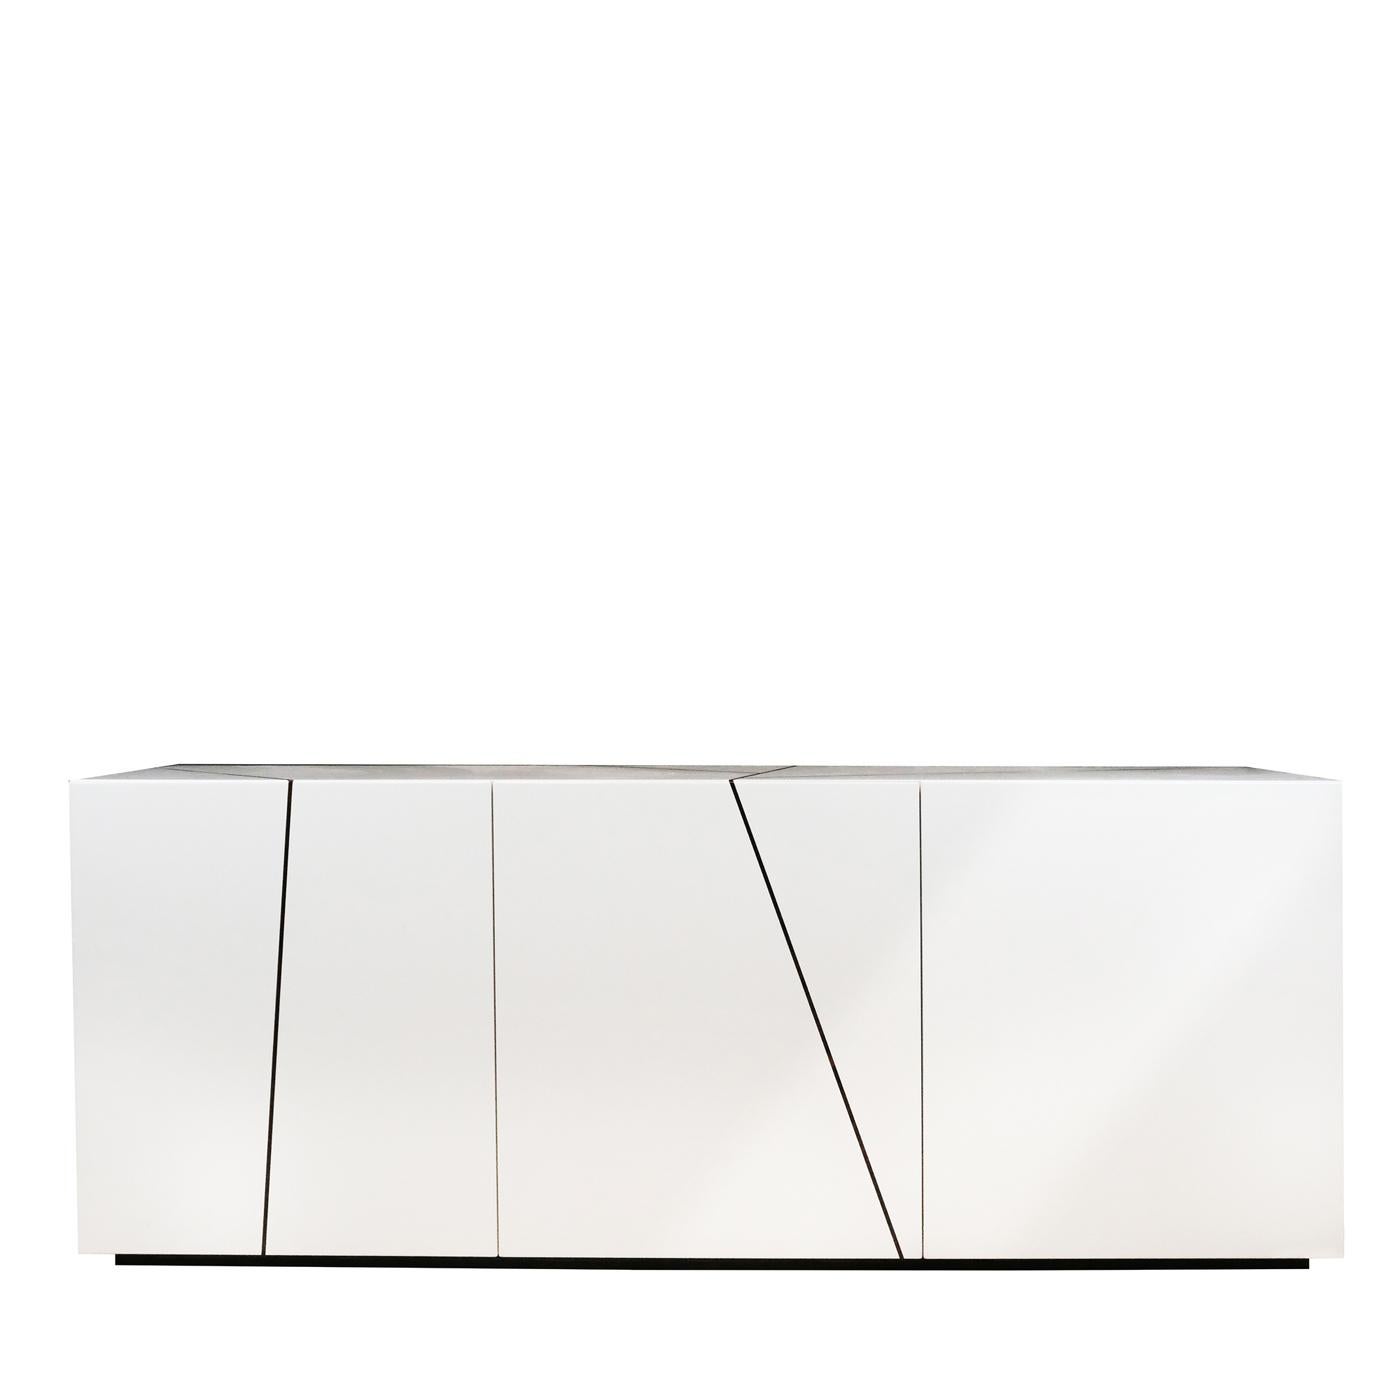 Minimalist sophistication characterizes this splendid sideboard. Marked by essential, geometric lines, it is fashioned of wood finished with a glossy cream polyurethane lacquer. It is composed of three doors enriched with straight, geometrical